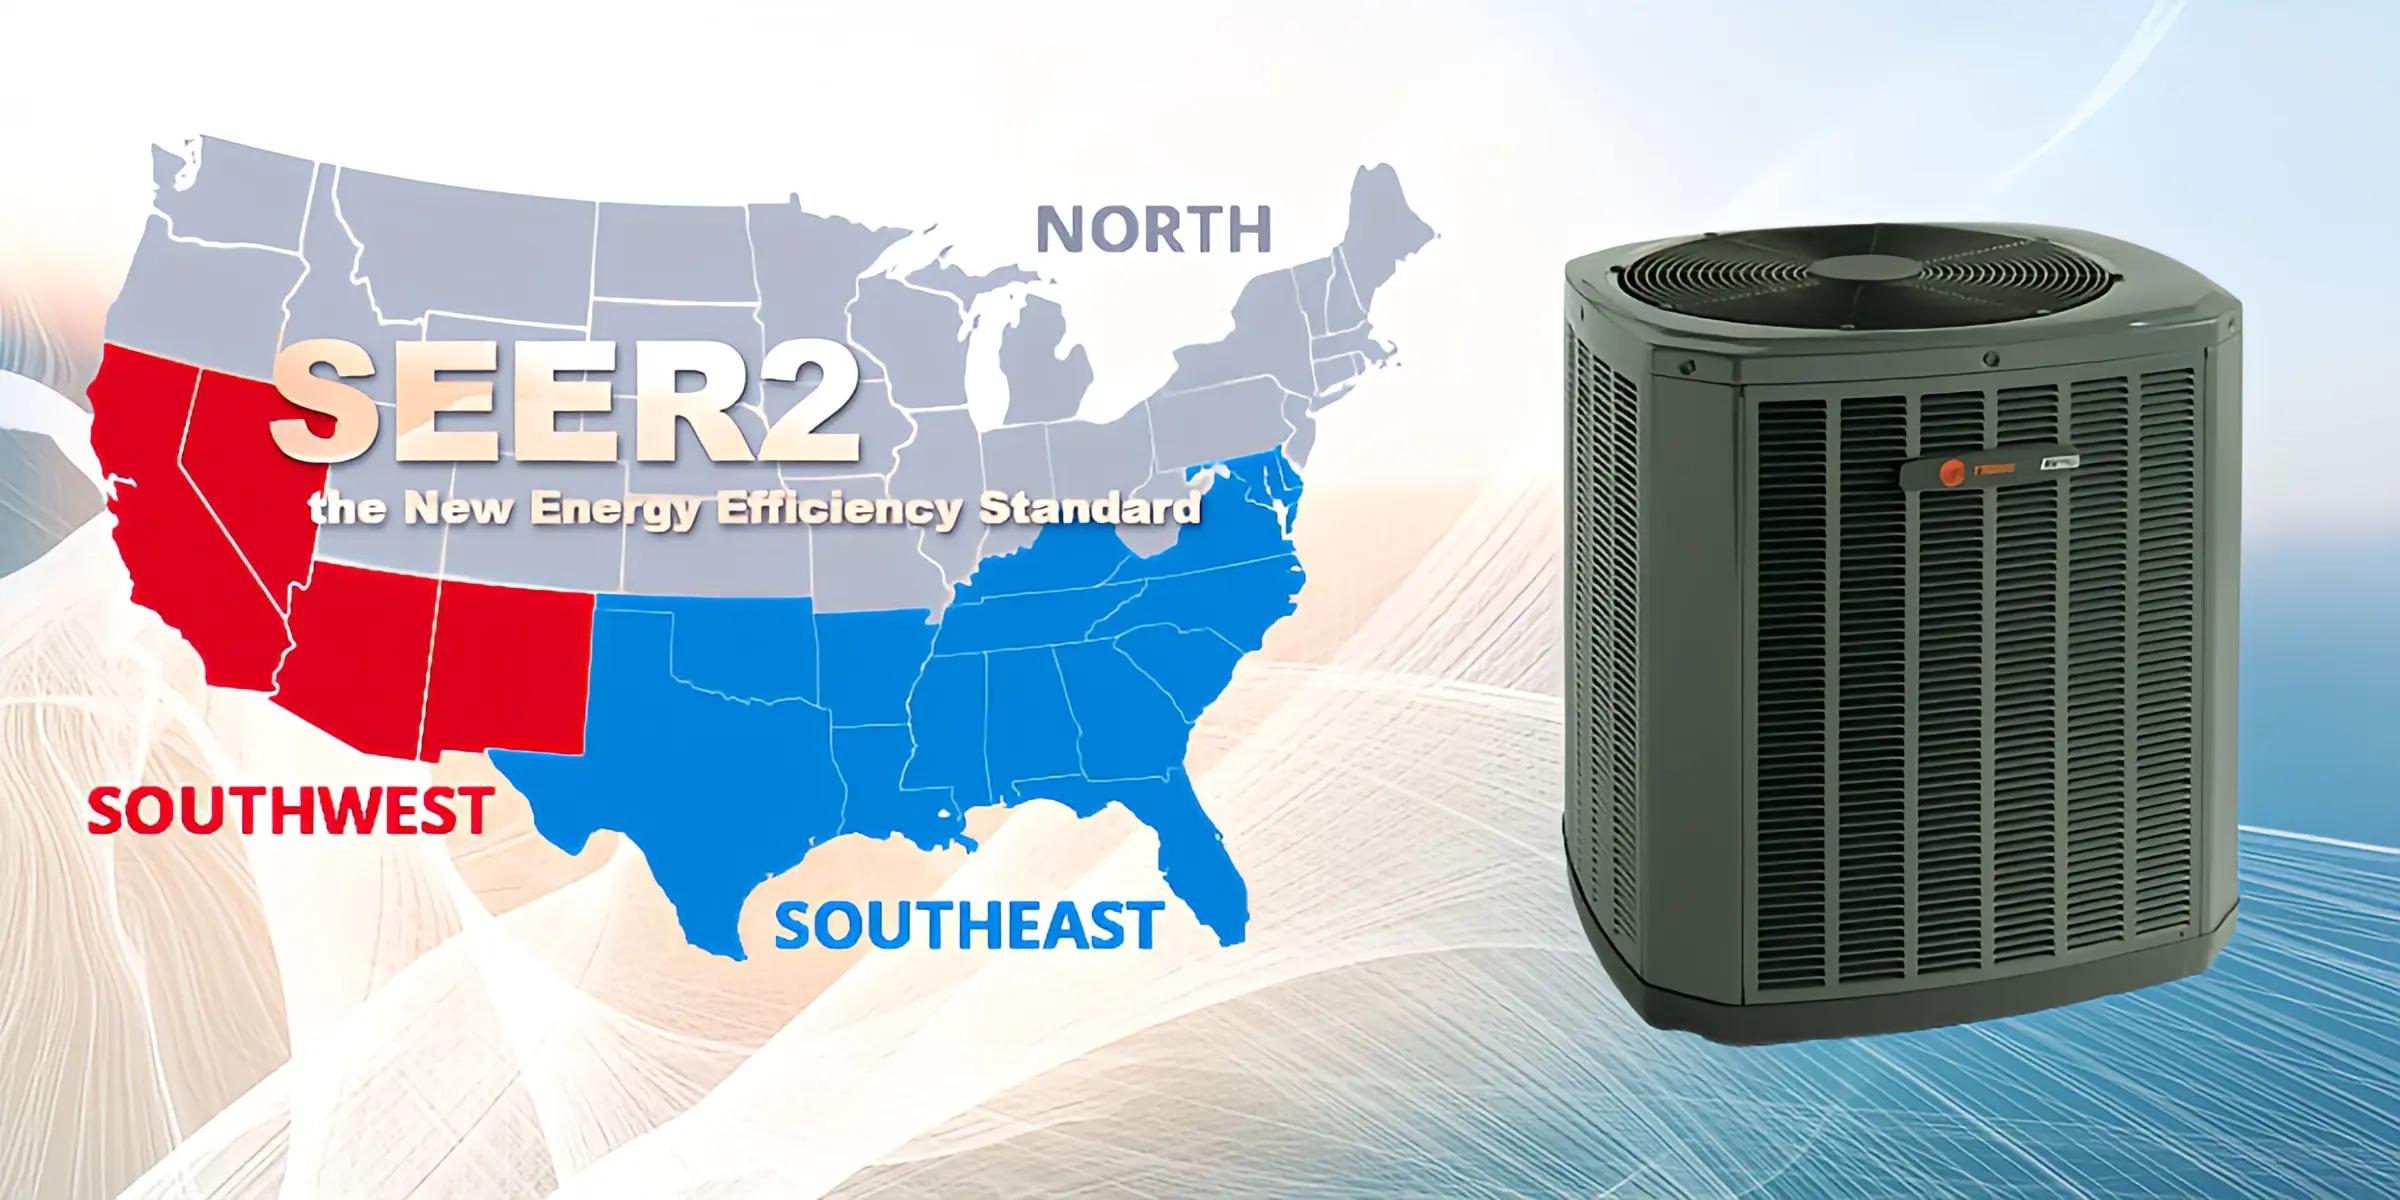 A map highlighting SEER2 and Trane air conditioner installations across various locations, illustrating areas of high efficiency and HVAC optimization.